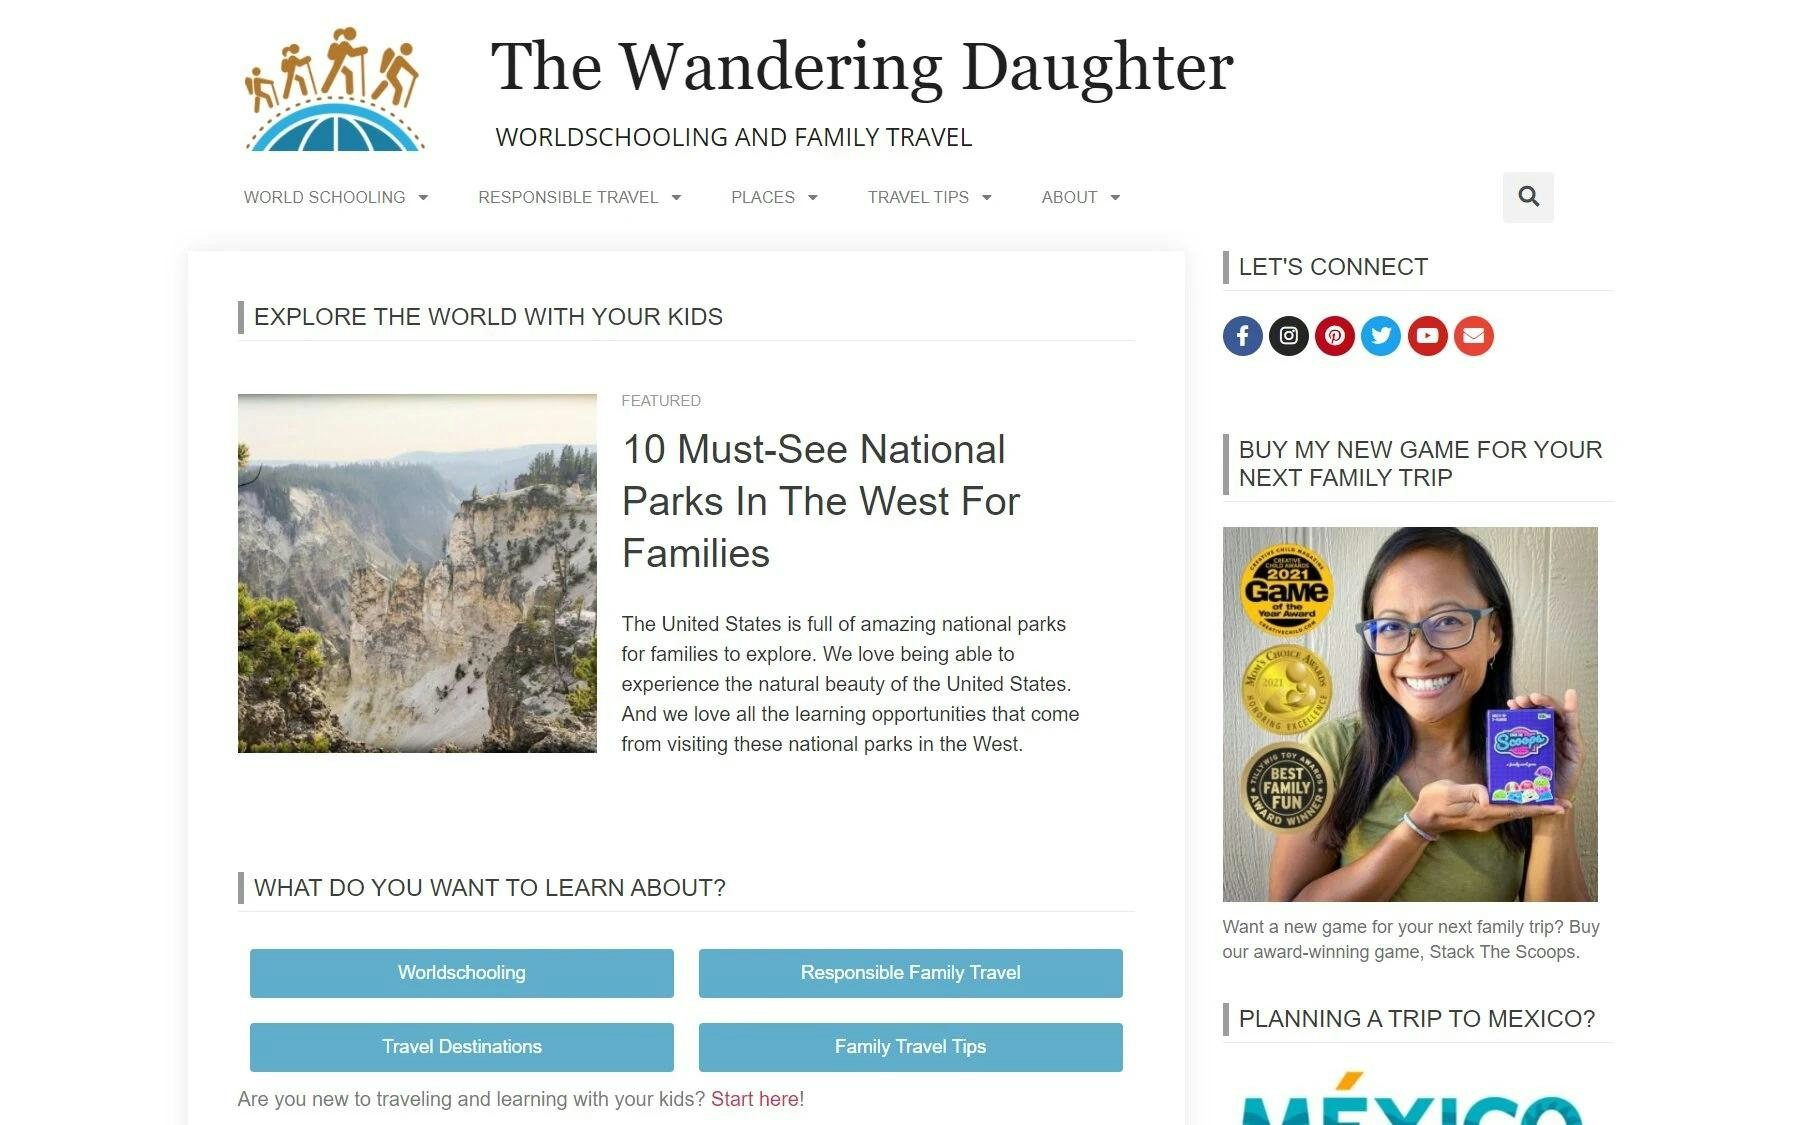 The Wandering Daughter travel blog